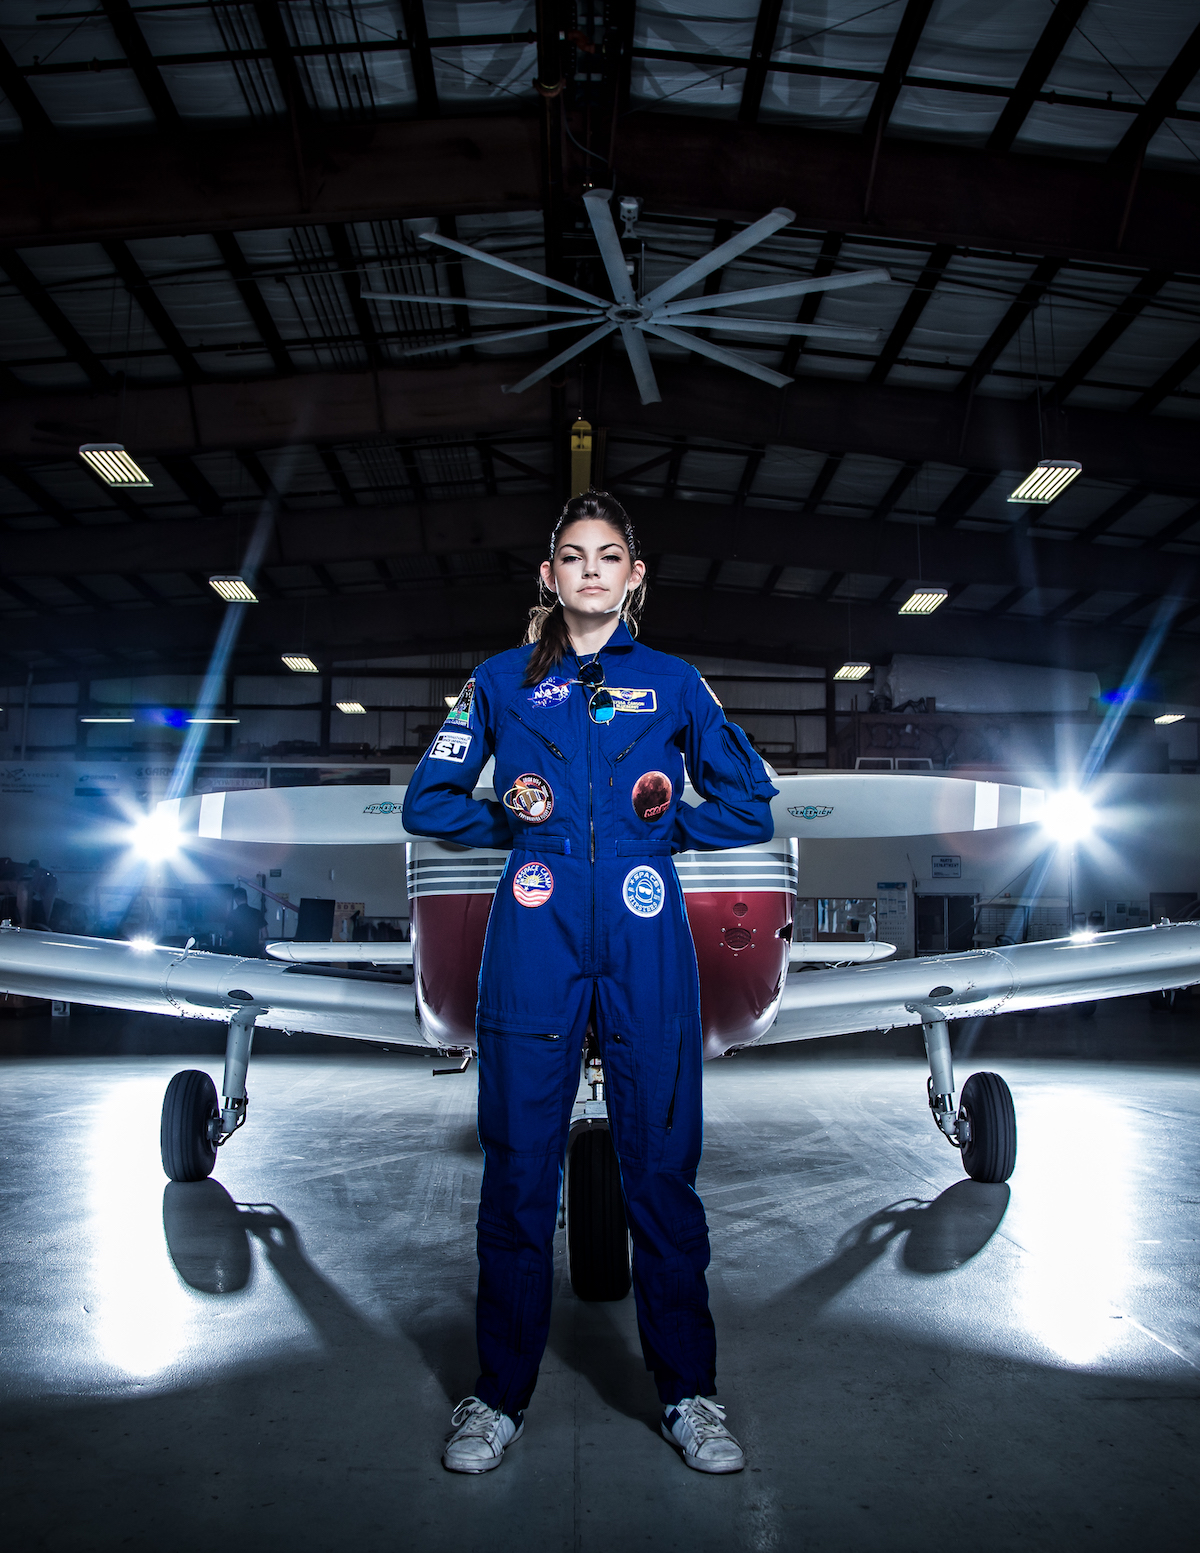 Astronaut Alyssa Carson wearing a blue flight suit and standing in front of a plane